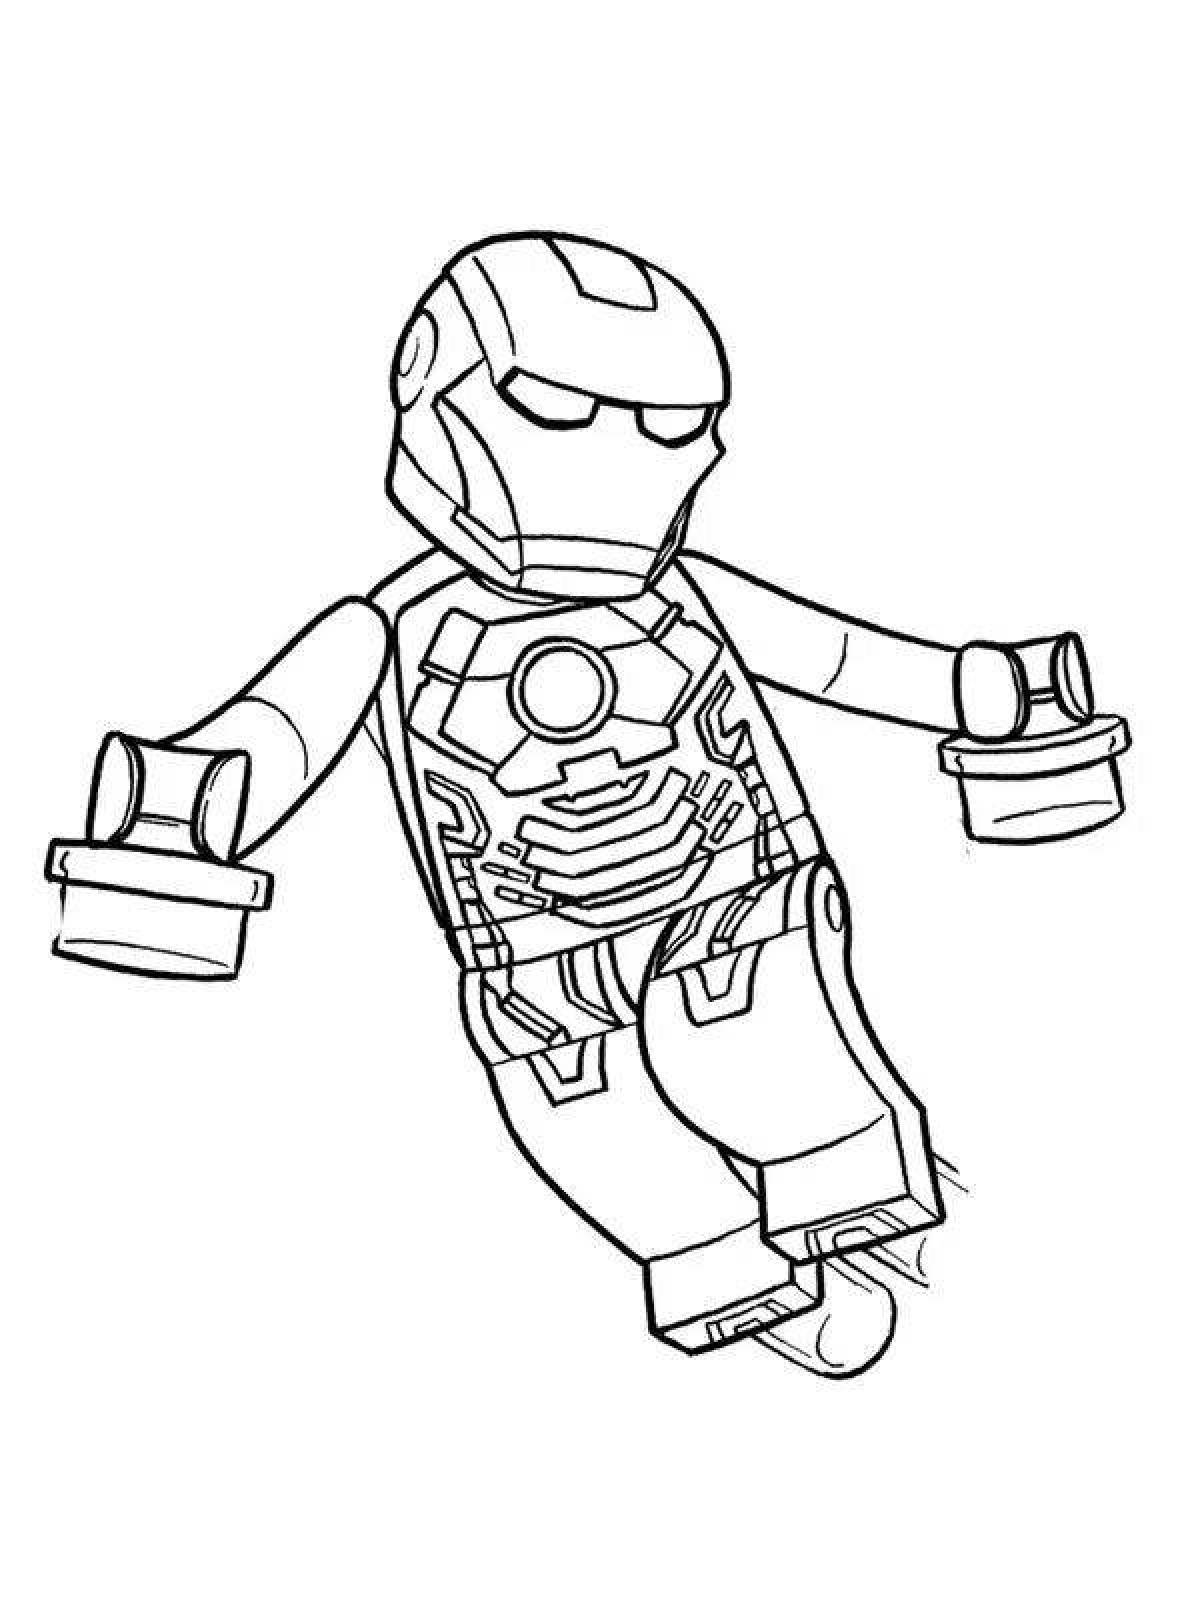 Lego man coloring page